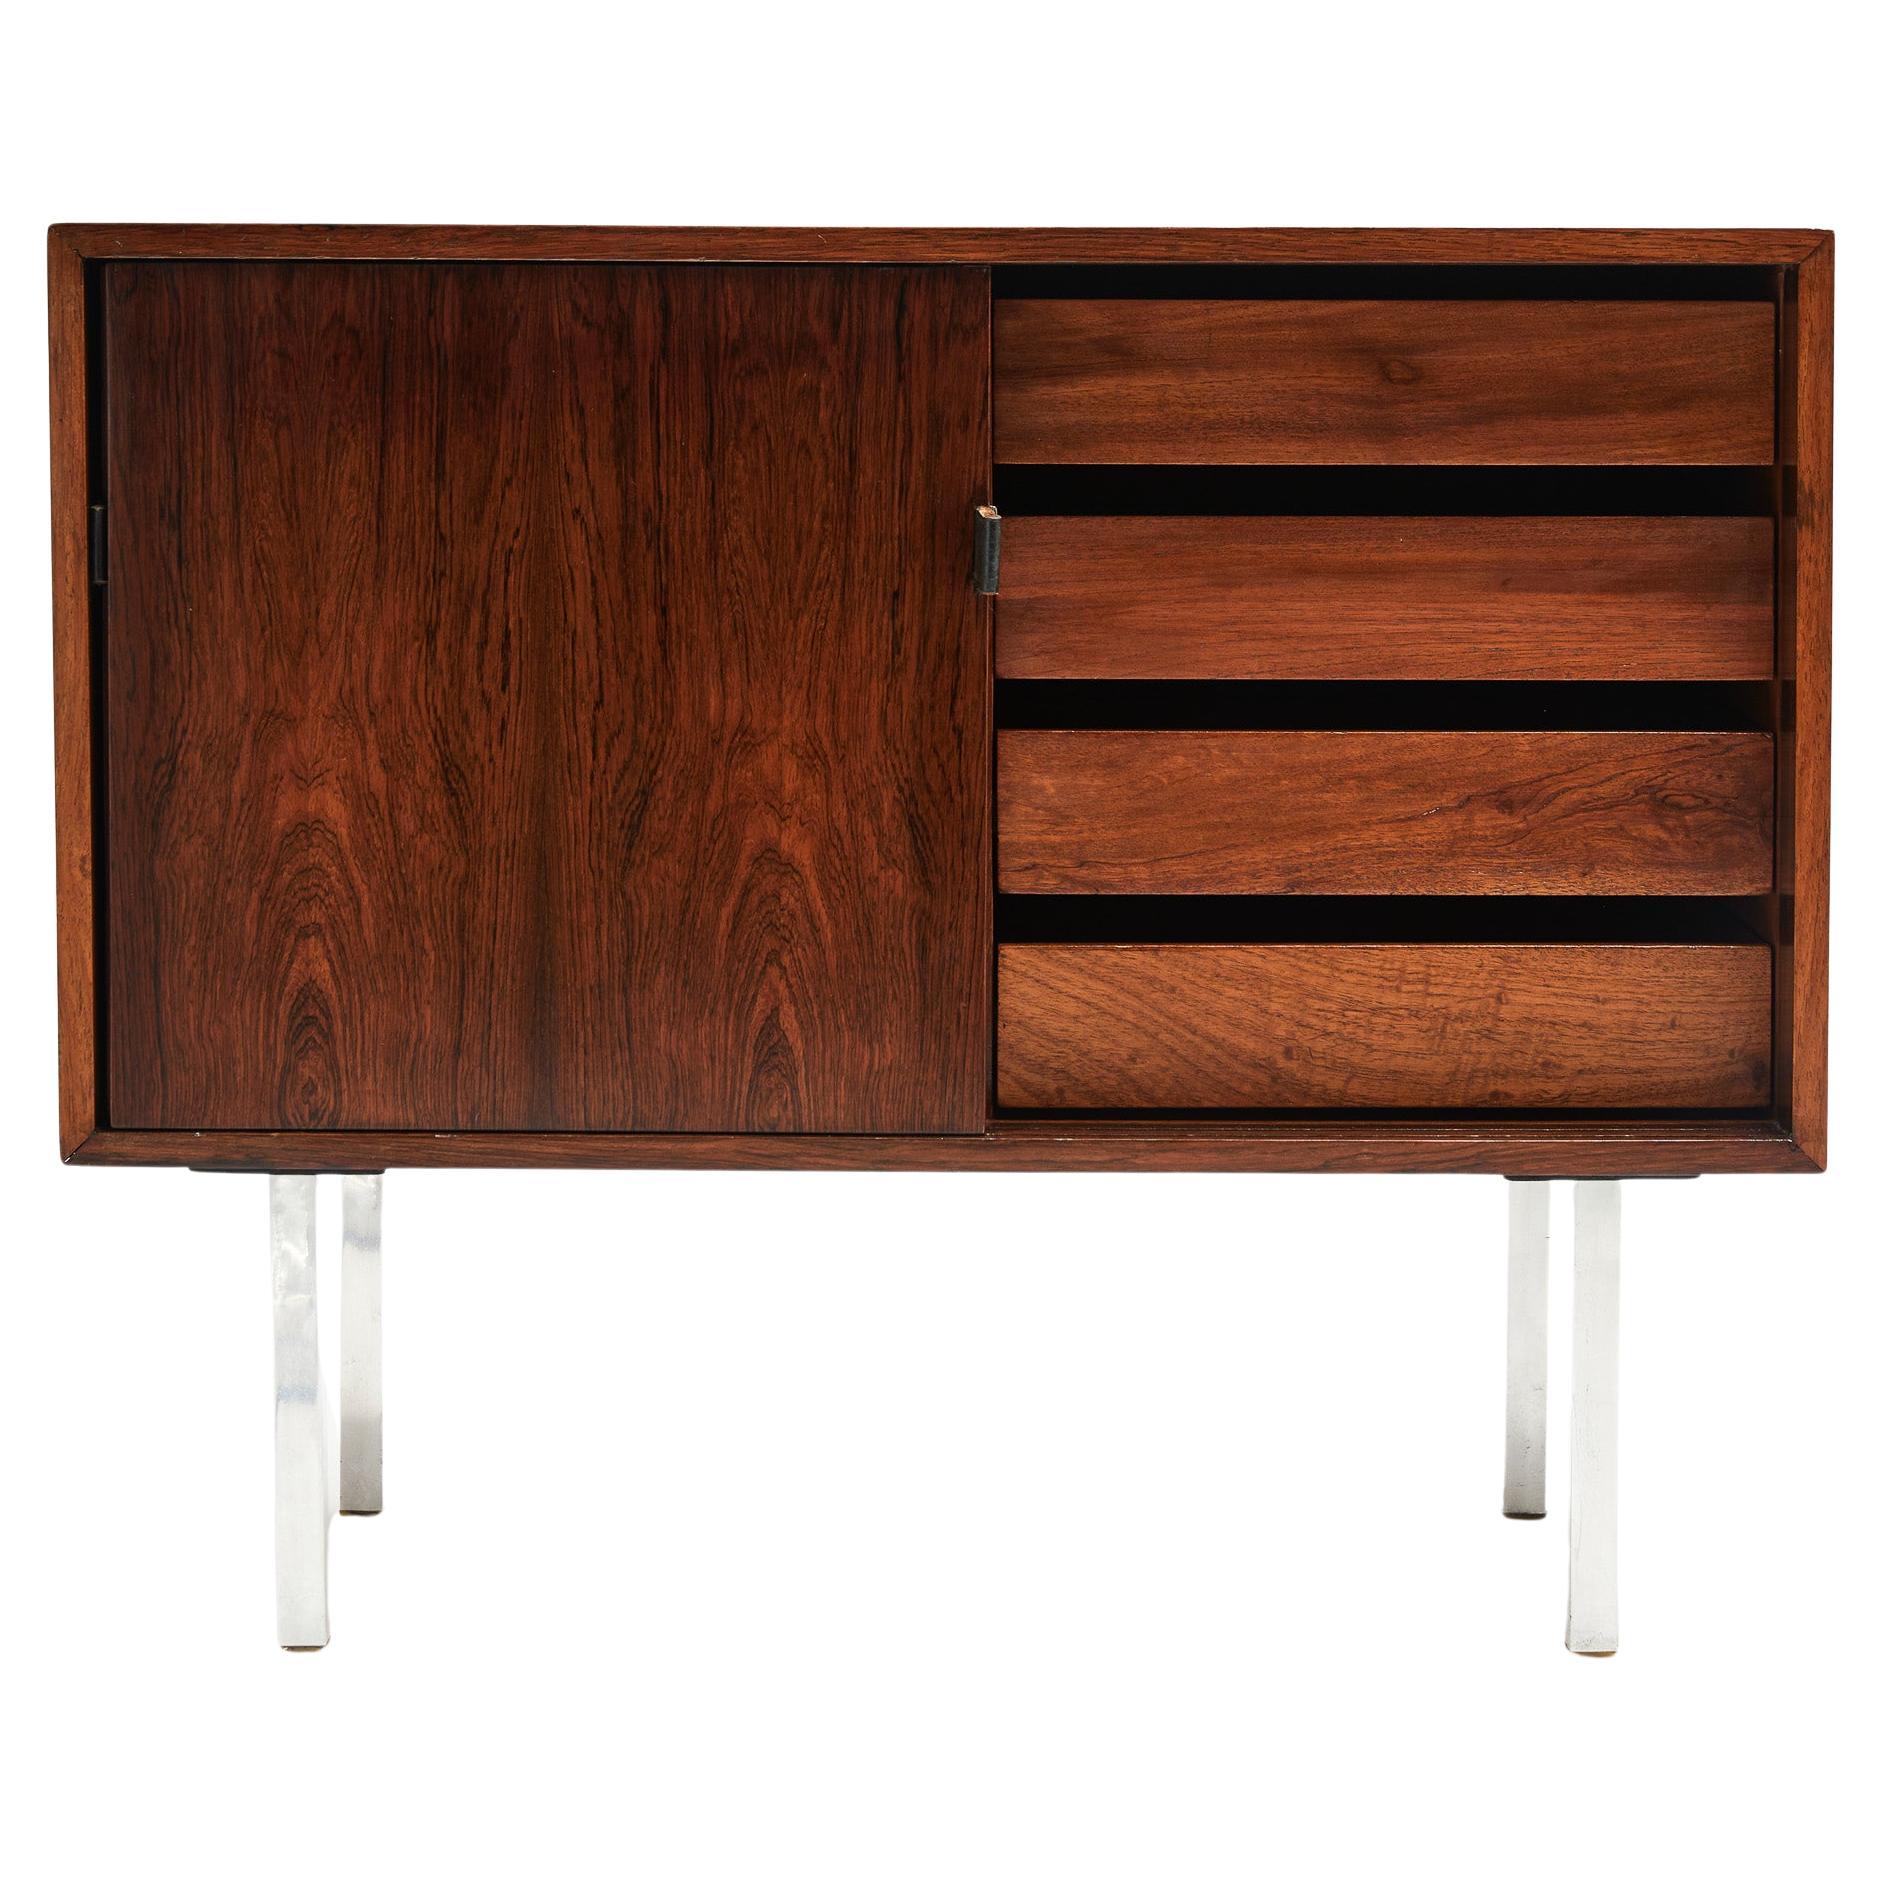 Midcentury Chest in Hardwood & Chrome by Forma Moveis, 1965 Brazil, Sealed For Sale